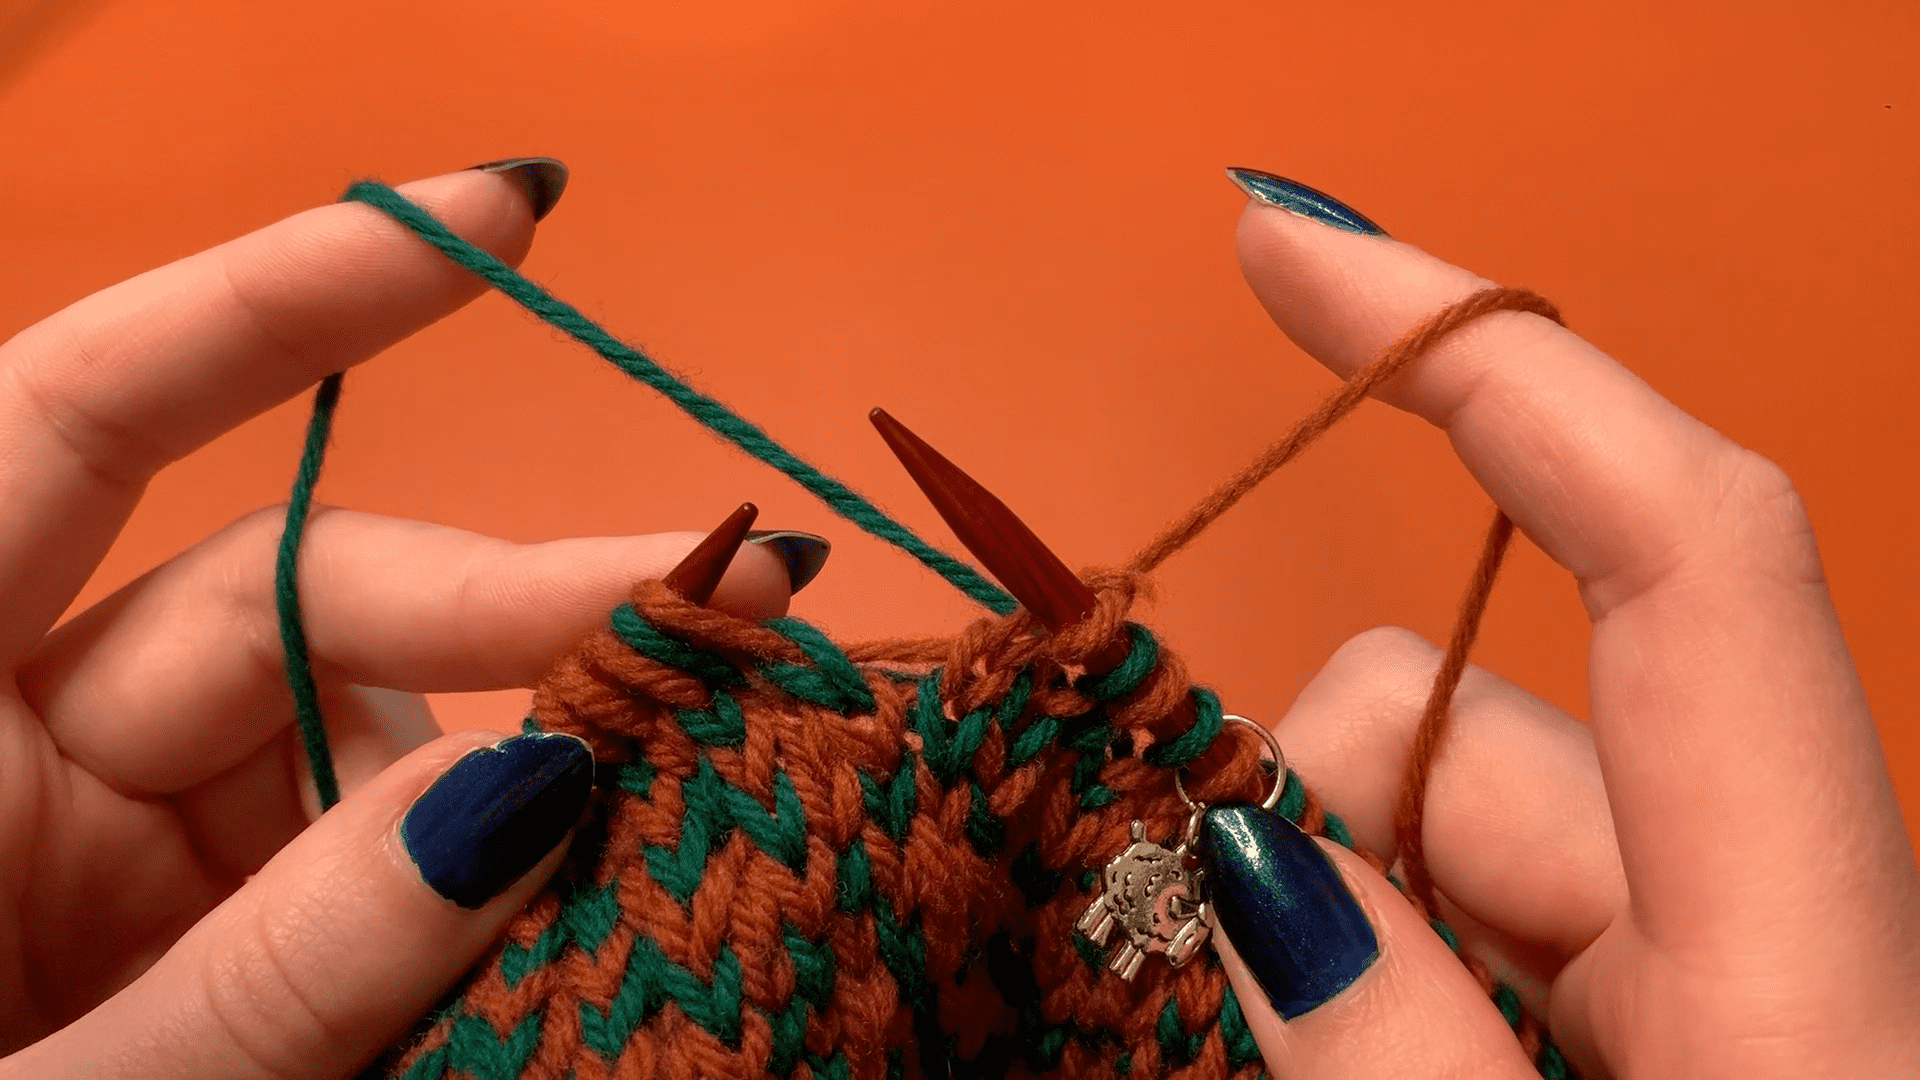 In this photo, the green yarn is held in the left hand and is therefore dominant.